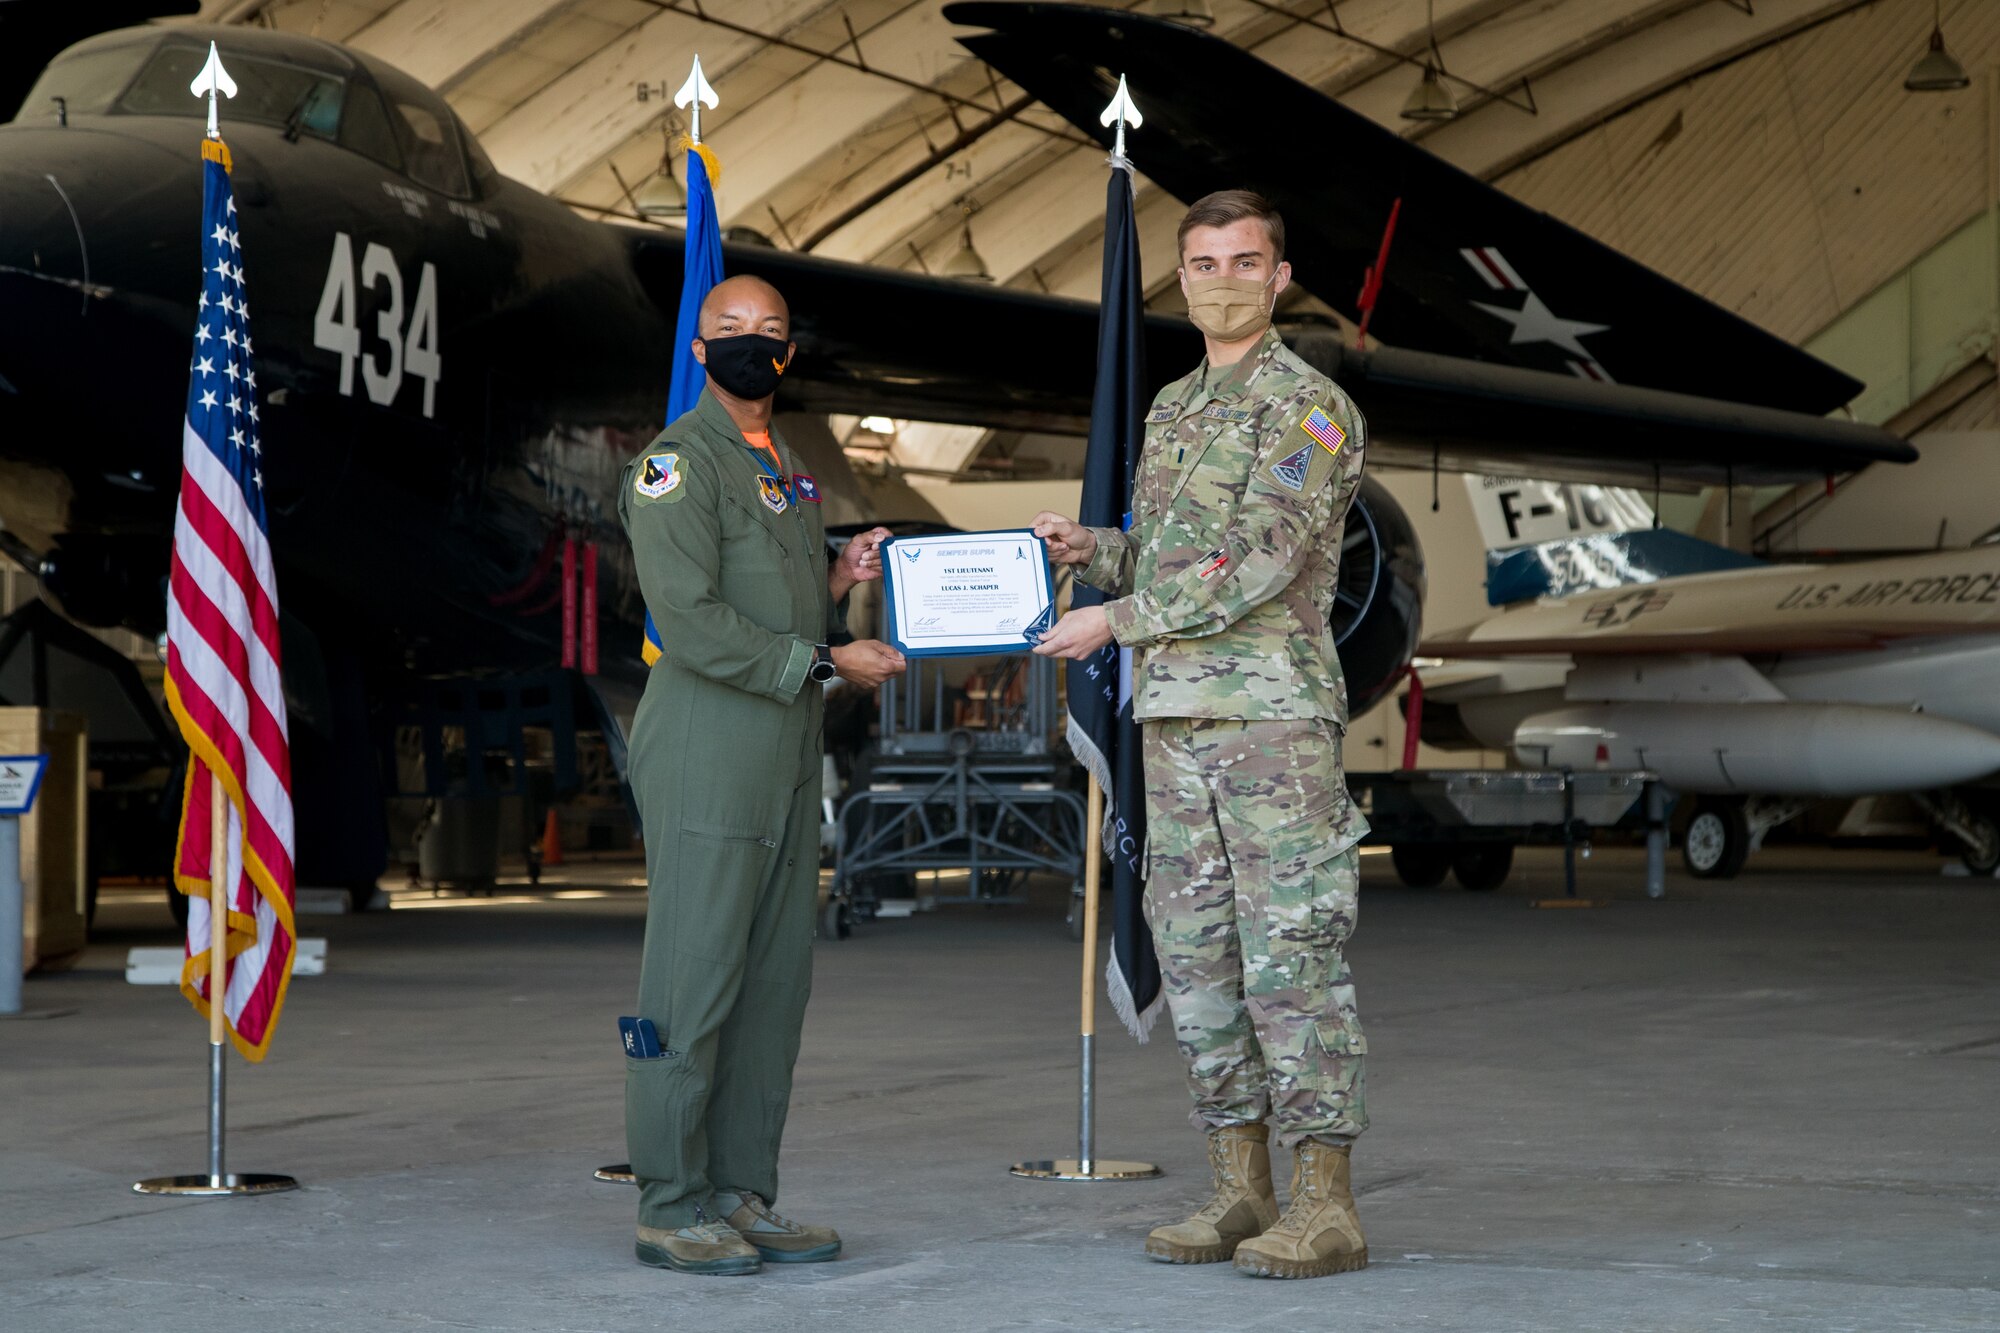 1st Lt. Lucas Schaper, Space Test Fundamentals Class 21-1, U.S. Air Force Test Pilot School, accepts his U.S. Space Force certificate from Col. Randel Gordon, 412th Test Wing Vice Commander, during a Space Force Transfer Ceremony at Edwards Air Force Base, California, Feb. 11. (Air Force photo by Richard Gonzales)